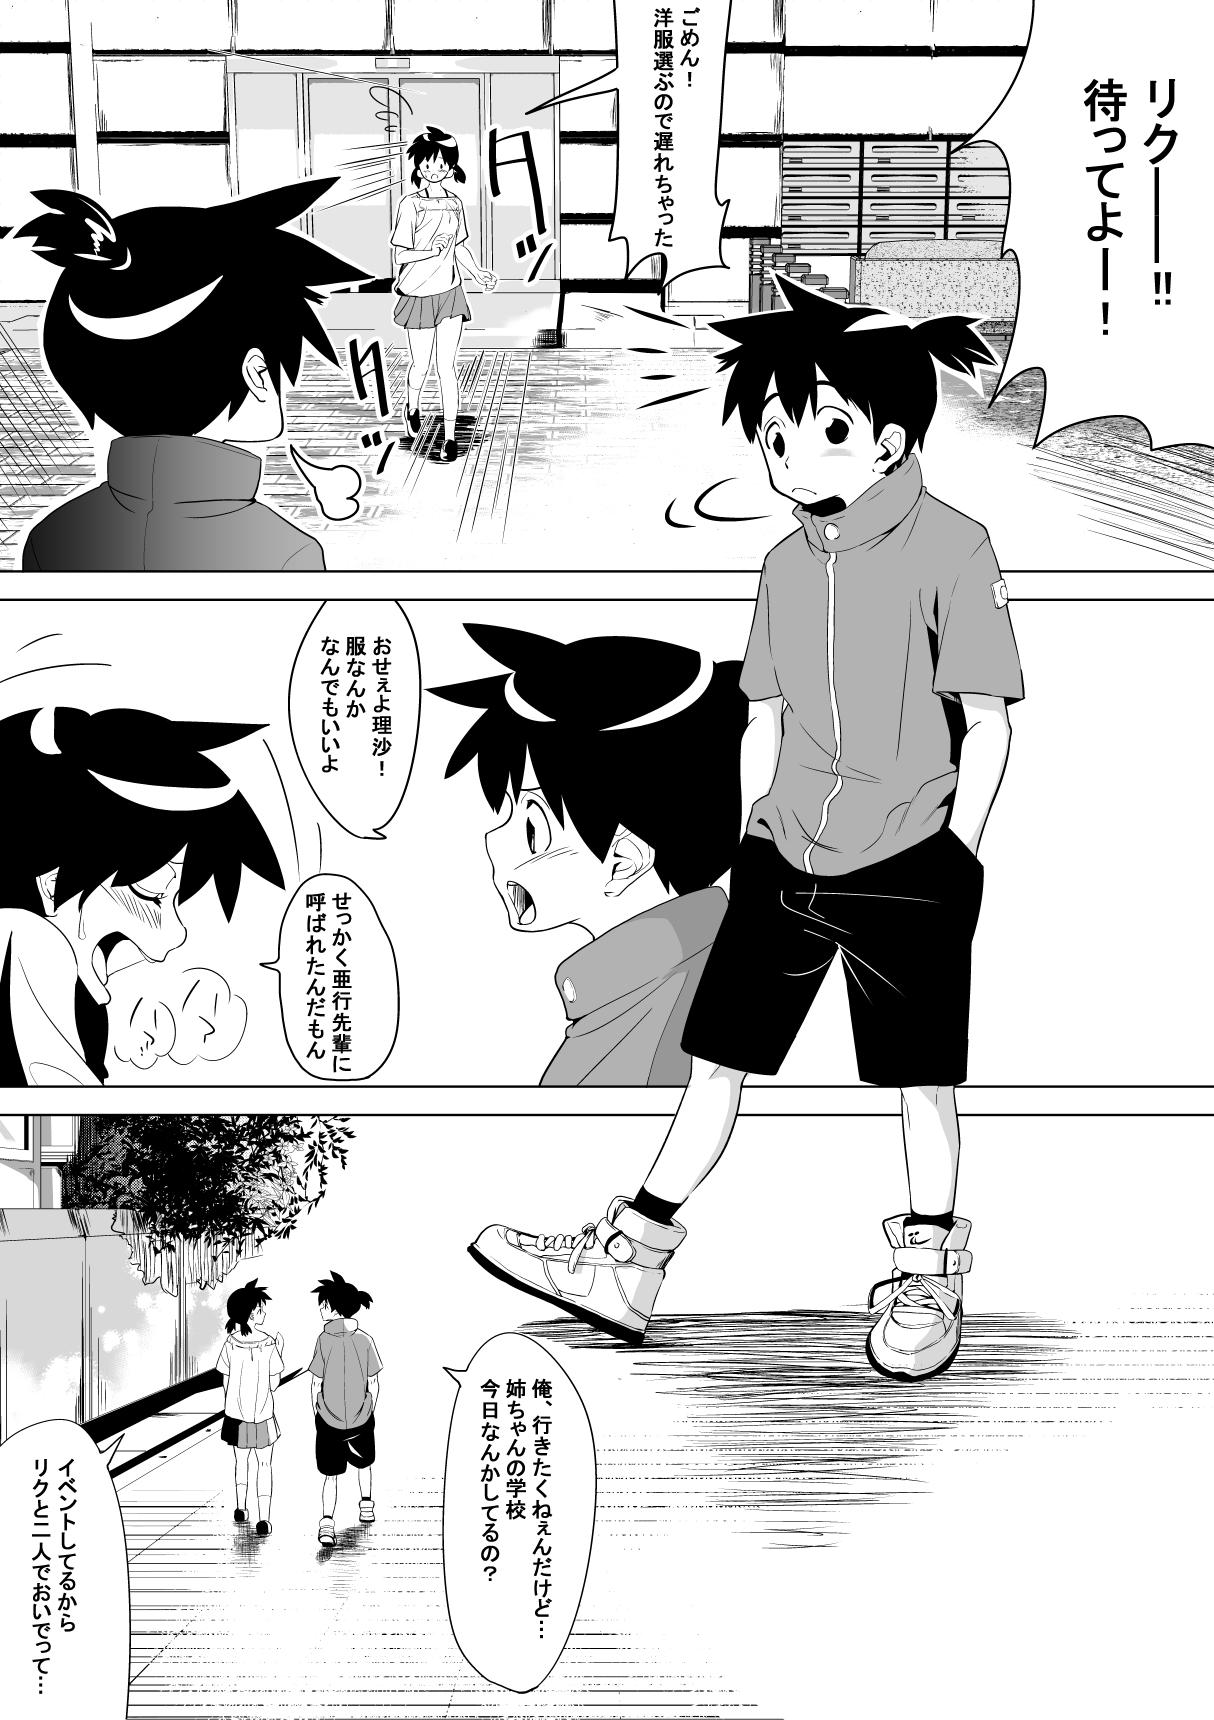 Young Old こんな国は嫌だ Erotica - Page 6